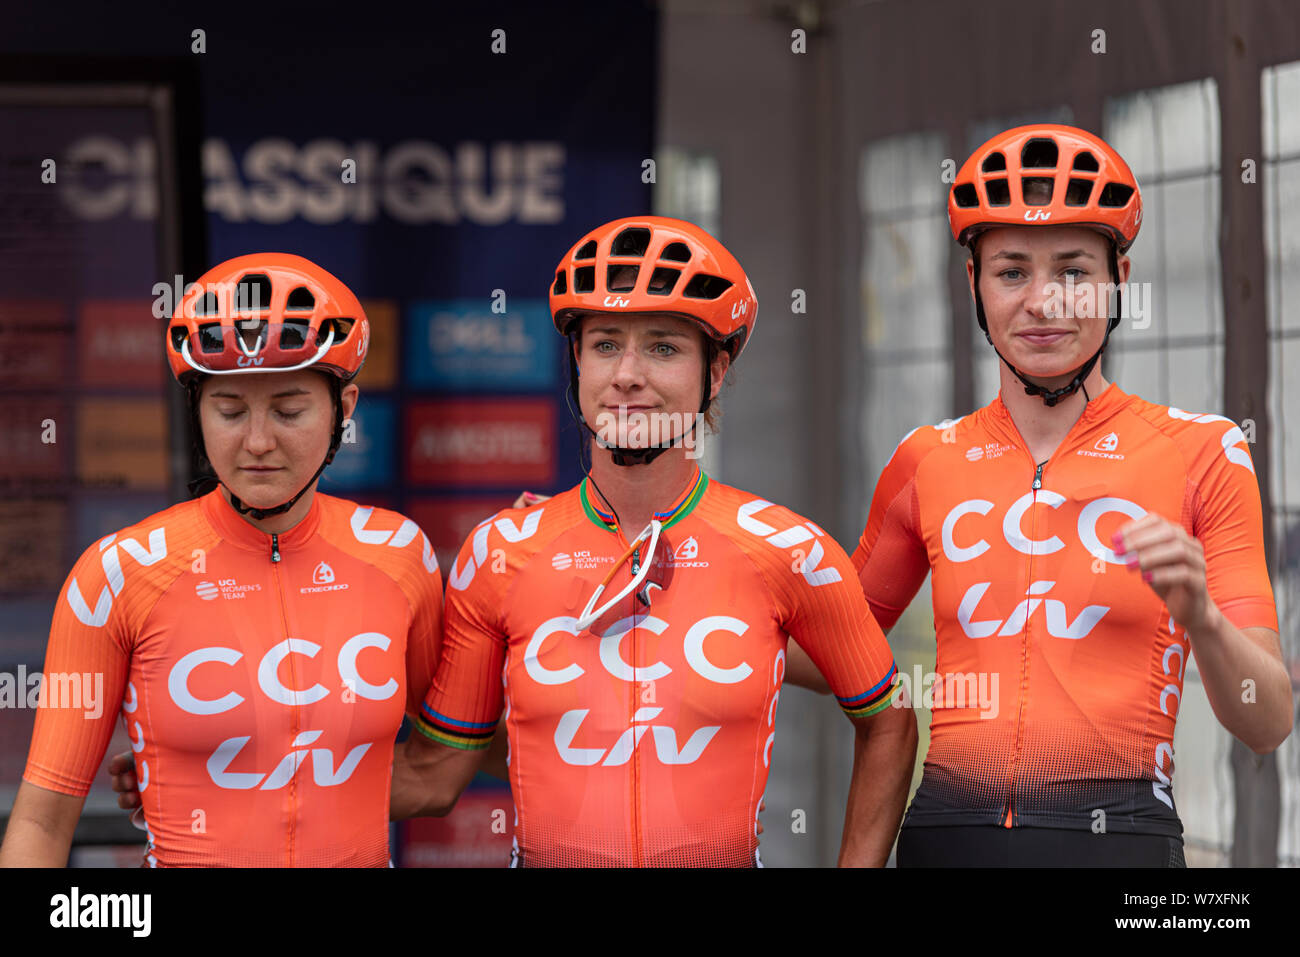 Valerie Demey, Marianne Vos, Riejanne Markus of team CCC Liv before racing in the Prudential RideLondon Classique cycle race. Female cyclist rider Stock Photo